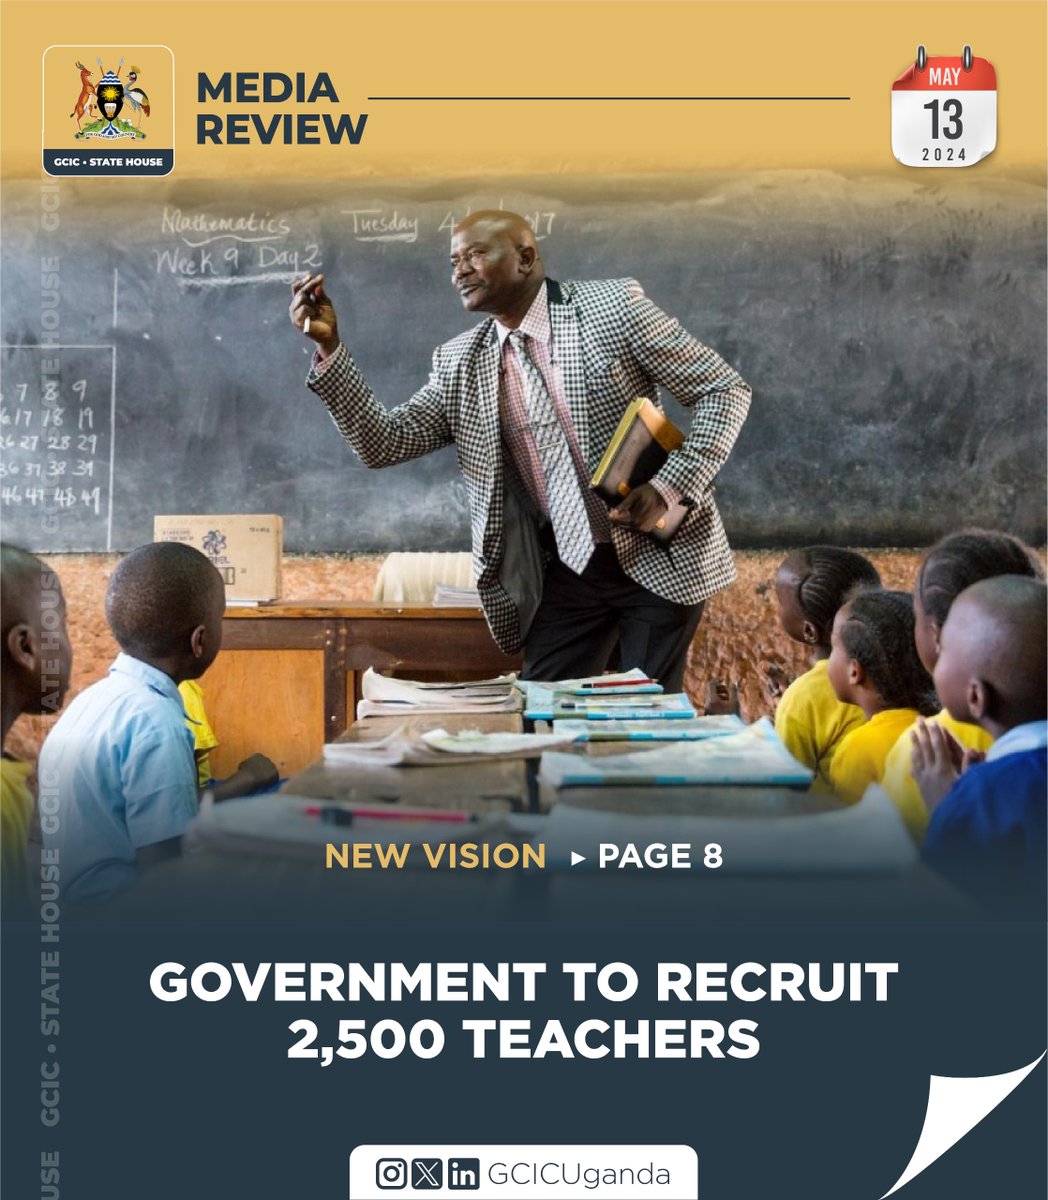 The @GovUganda plans to establish 83 new seed secondary schools in sub-counties without government-aided schools nationwide, recruiting 2,573 new teachers starting in July. #GCICMedaiaReview